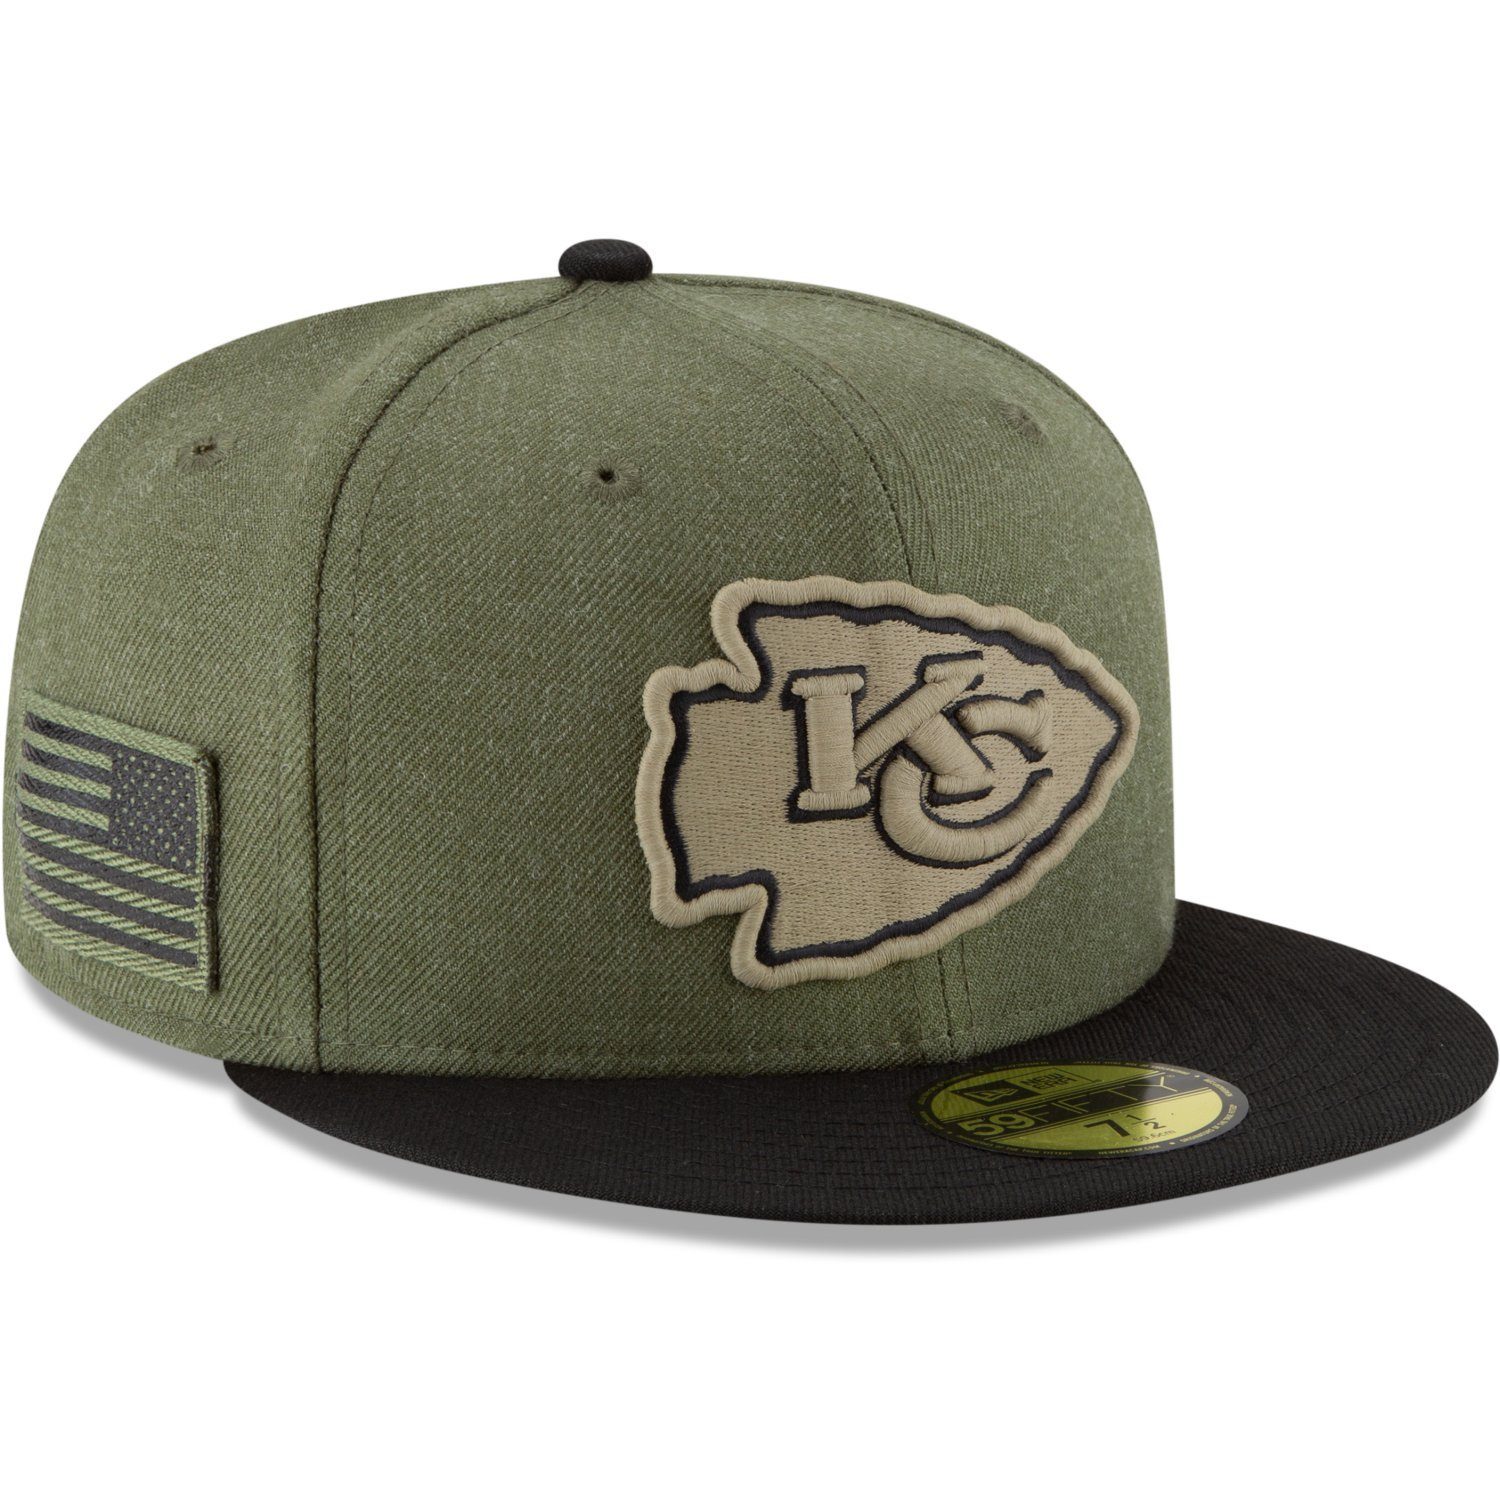 NFL Cap Chiefs Service New 59Fifty Kansas Fitted Salute Era to City